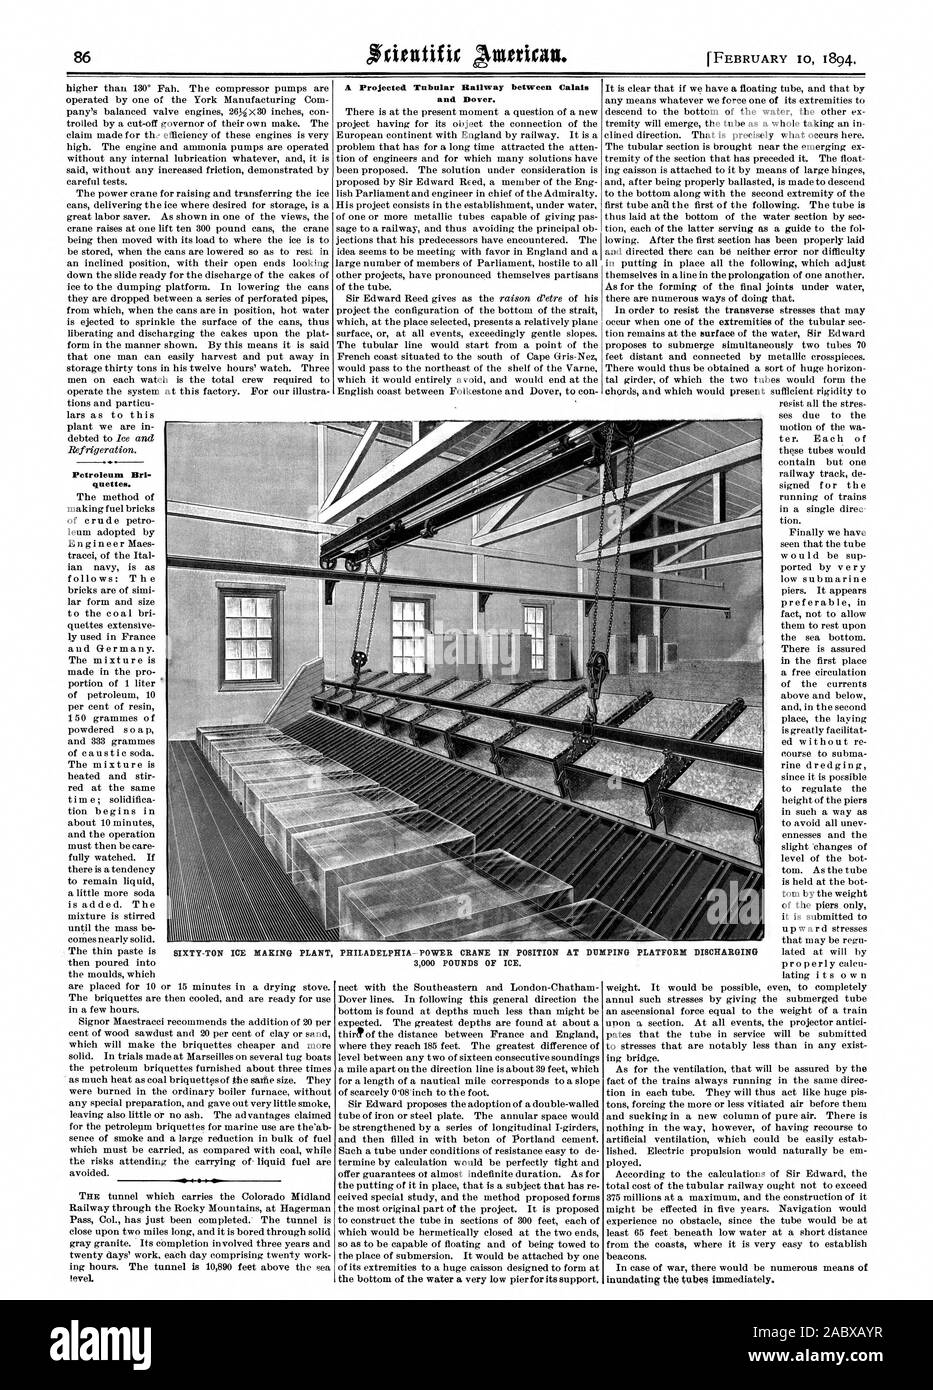 Petroleum Bri quettes. level. A Projected Tubular Railway between Calais and Dover. ICE PLANT MAKING SIXTY-TON PLATFORM DISCHARGING PHILADELPHIA—POWER CRANE IN POSITION AT DUMPING 3000 POUNDS OF ICE., scientific american, 1894-02-10 Stock Photo